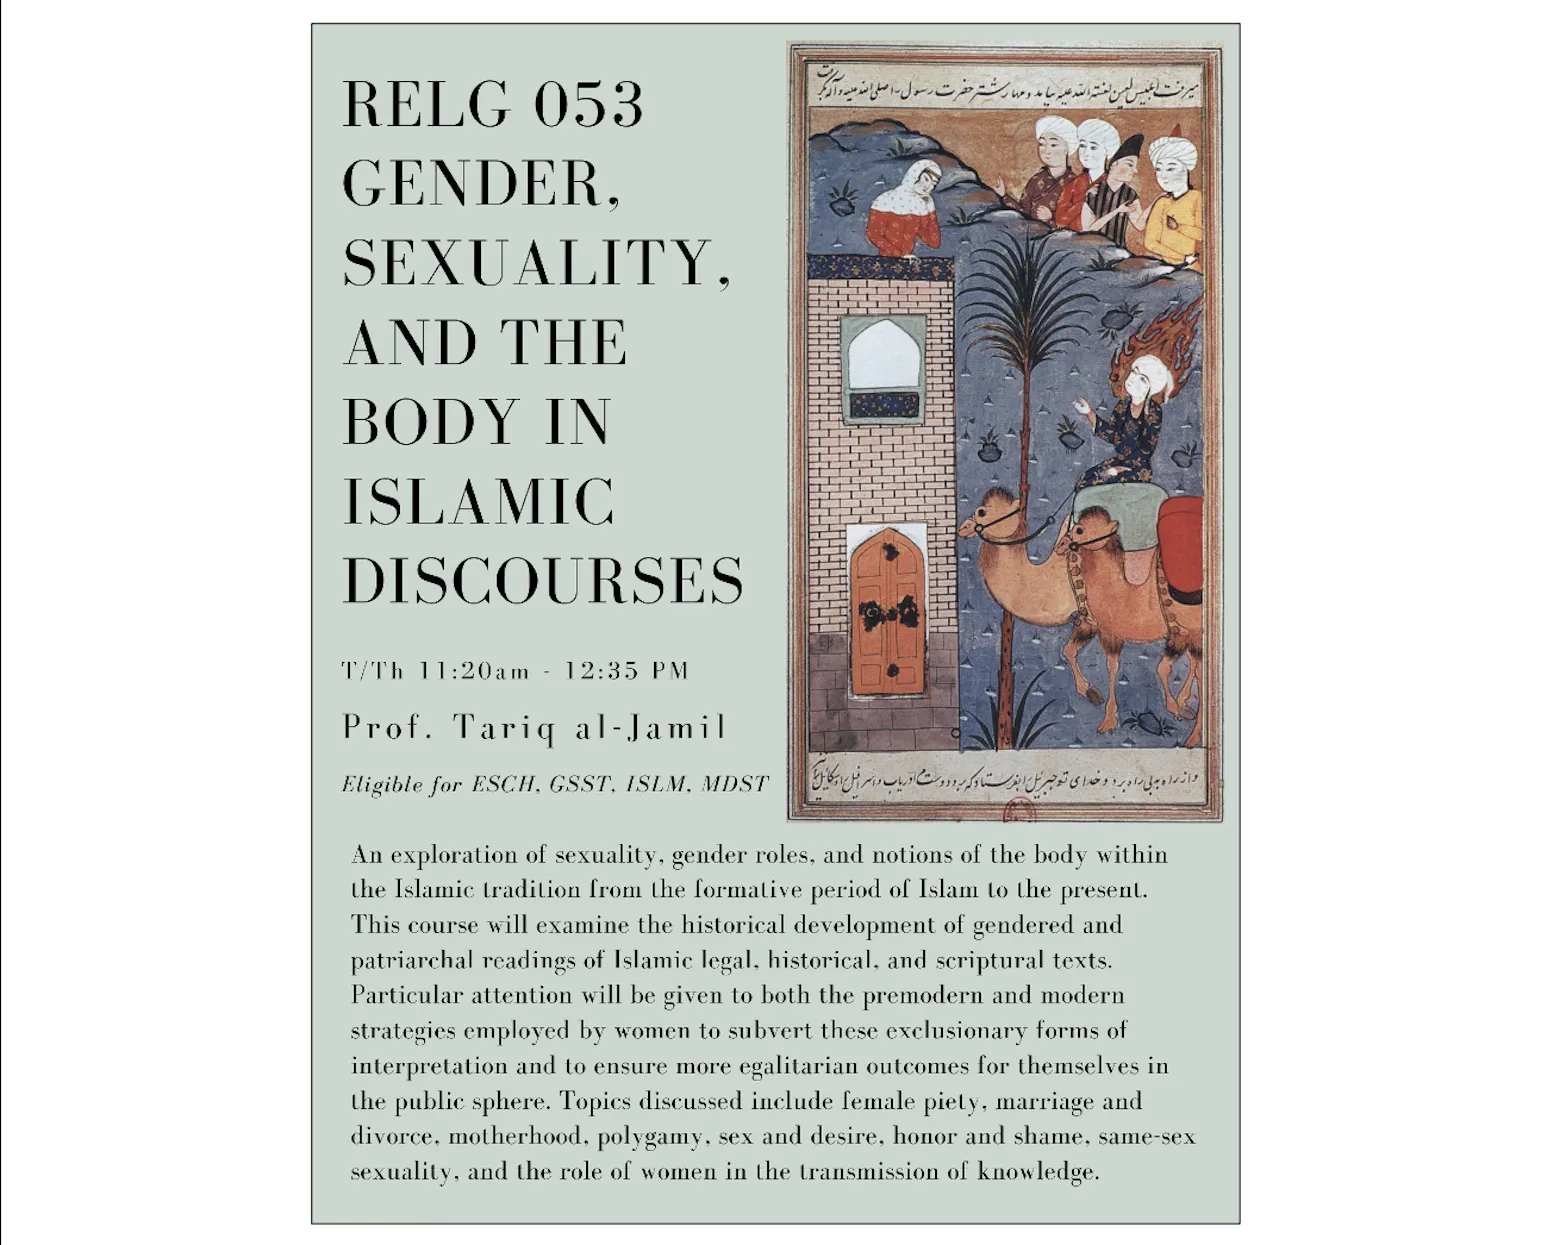 Religion 053: Gender, Sexuality, and the Body in Islamic Discourses